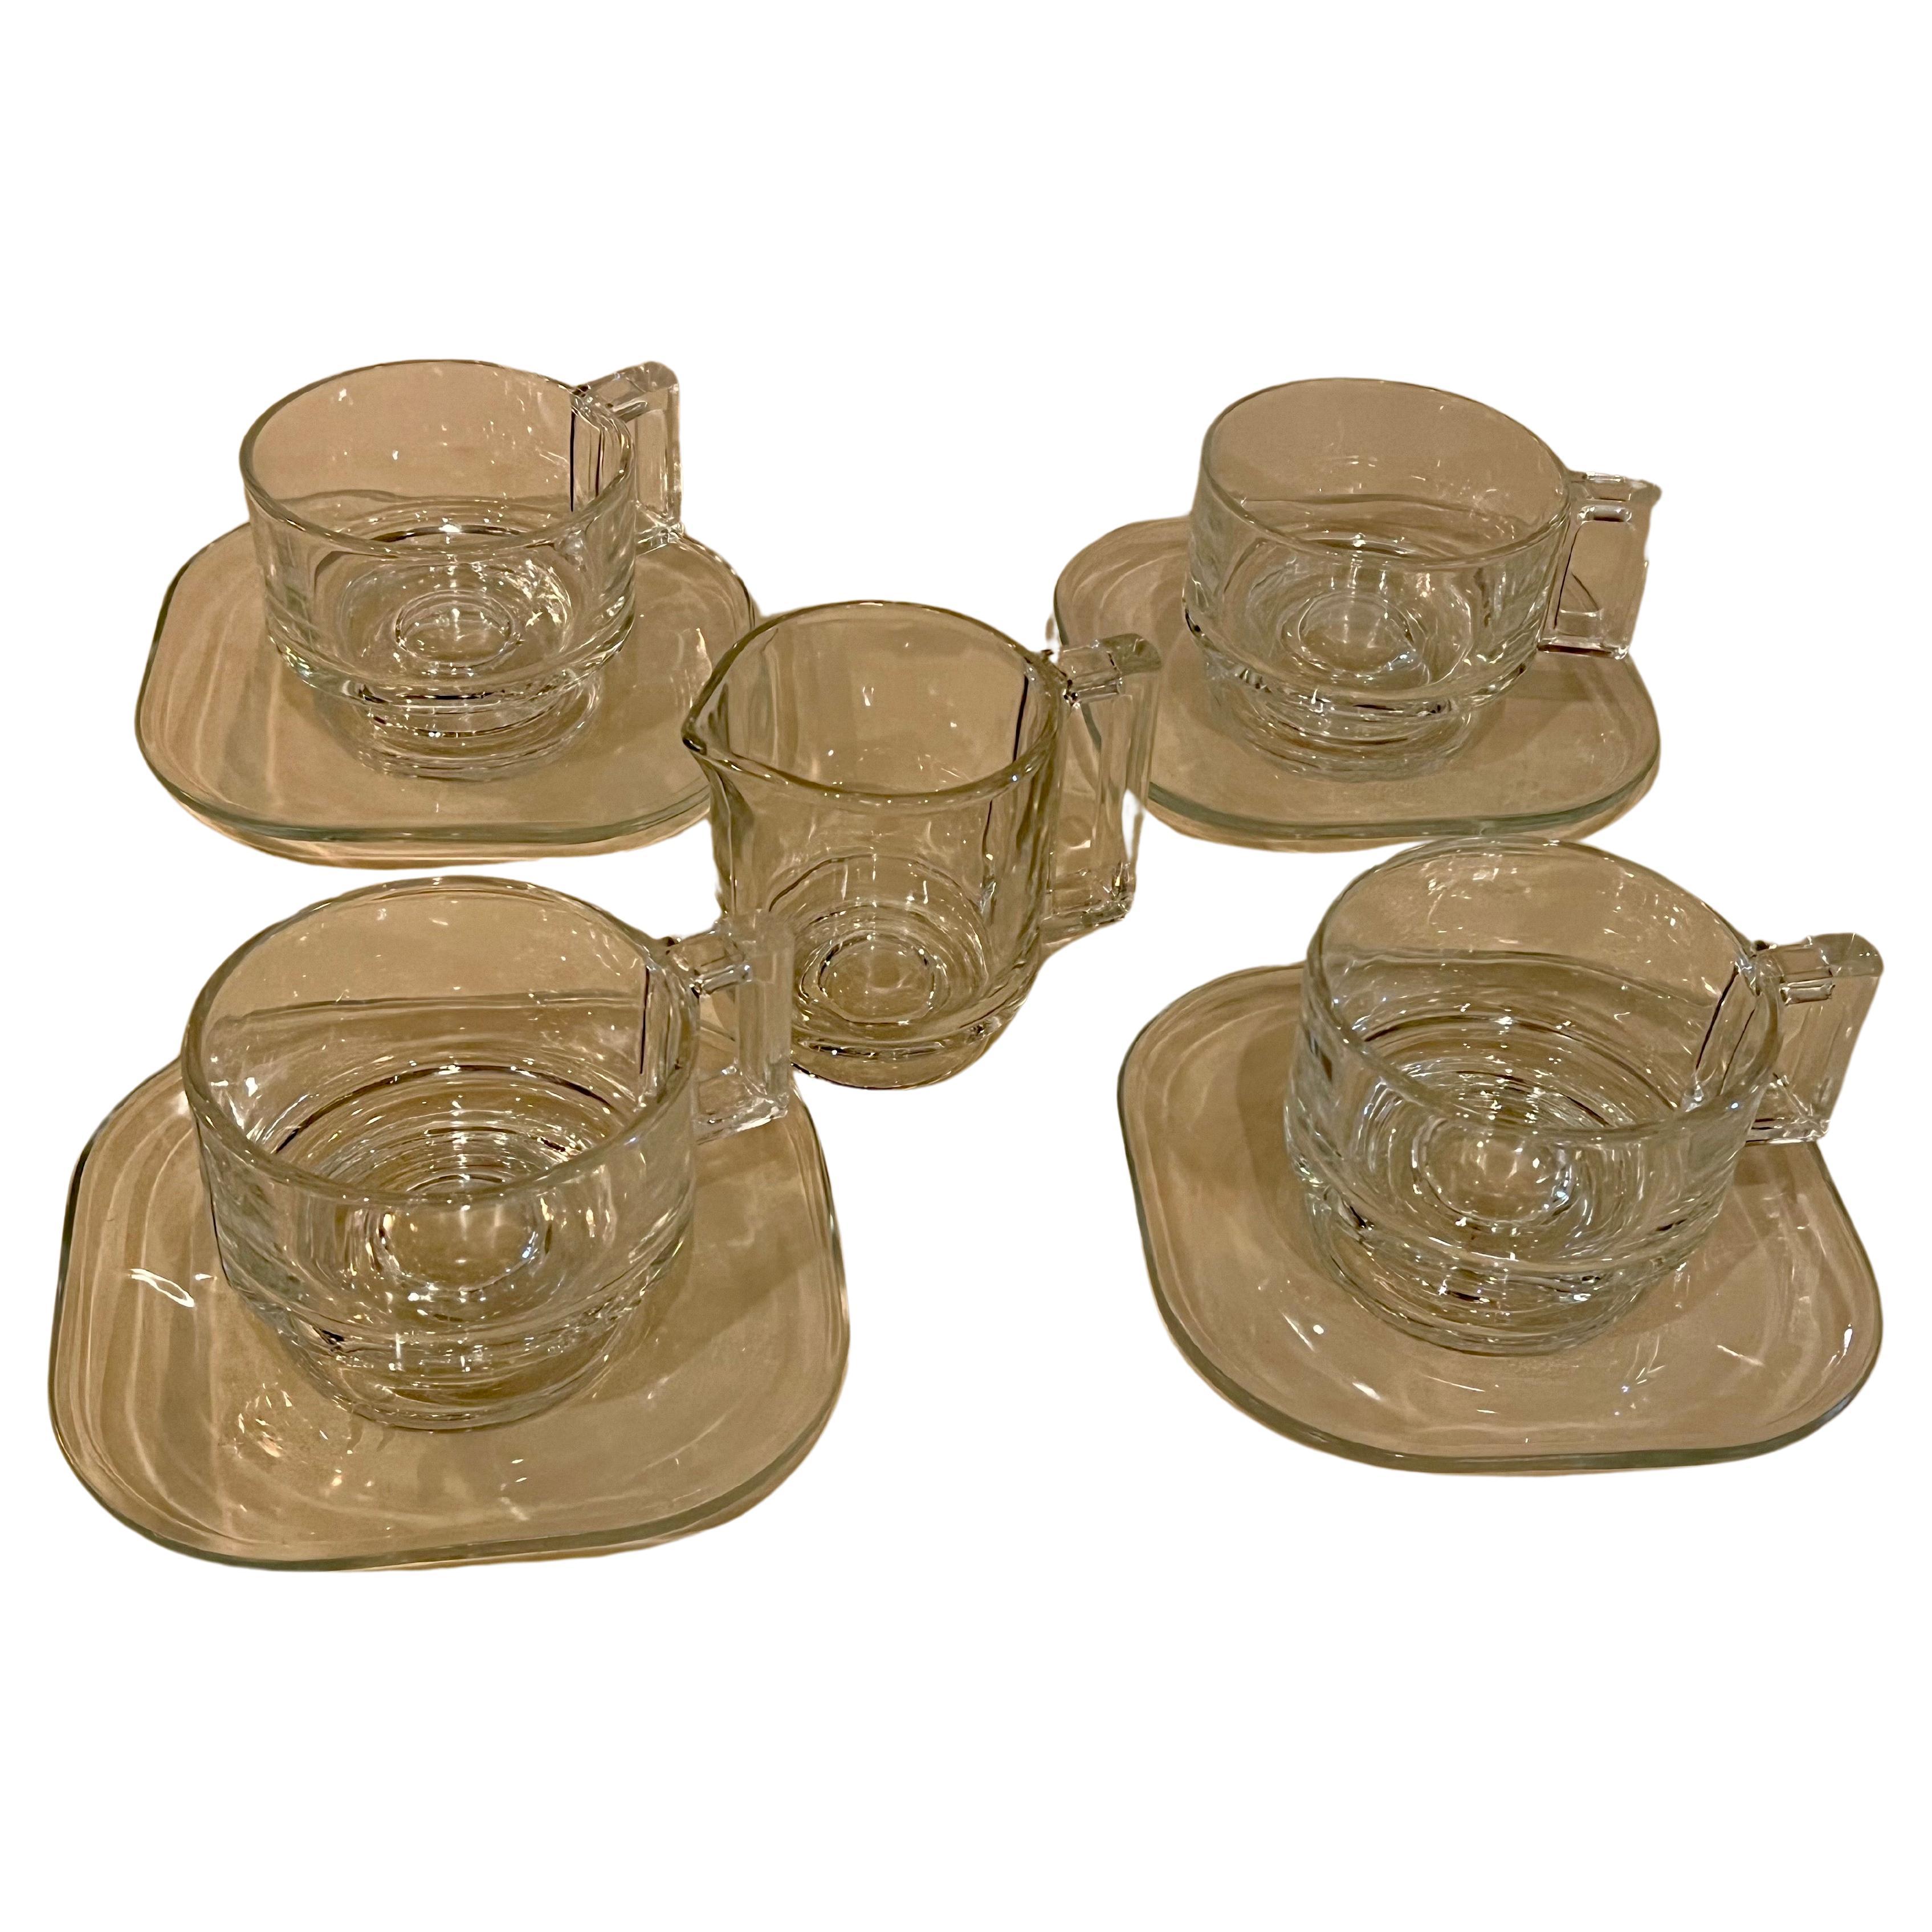 https://a.1stdibscdn.com/rare-glass-coffee-tea-set-with-creamer-plate-by-joe-colombo-for-arno-for-sale/f_9366/f_362987421695501336317/f_36298742_1695501337911_bg_processed.jpg